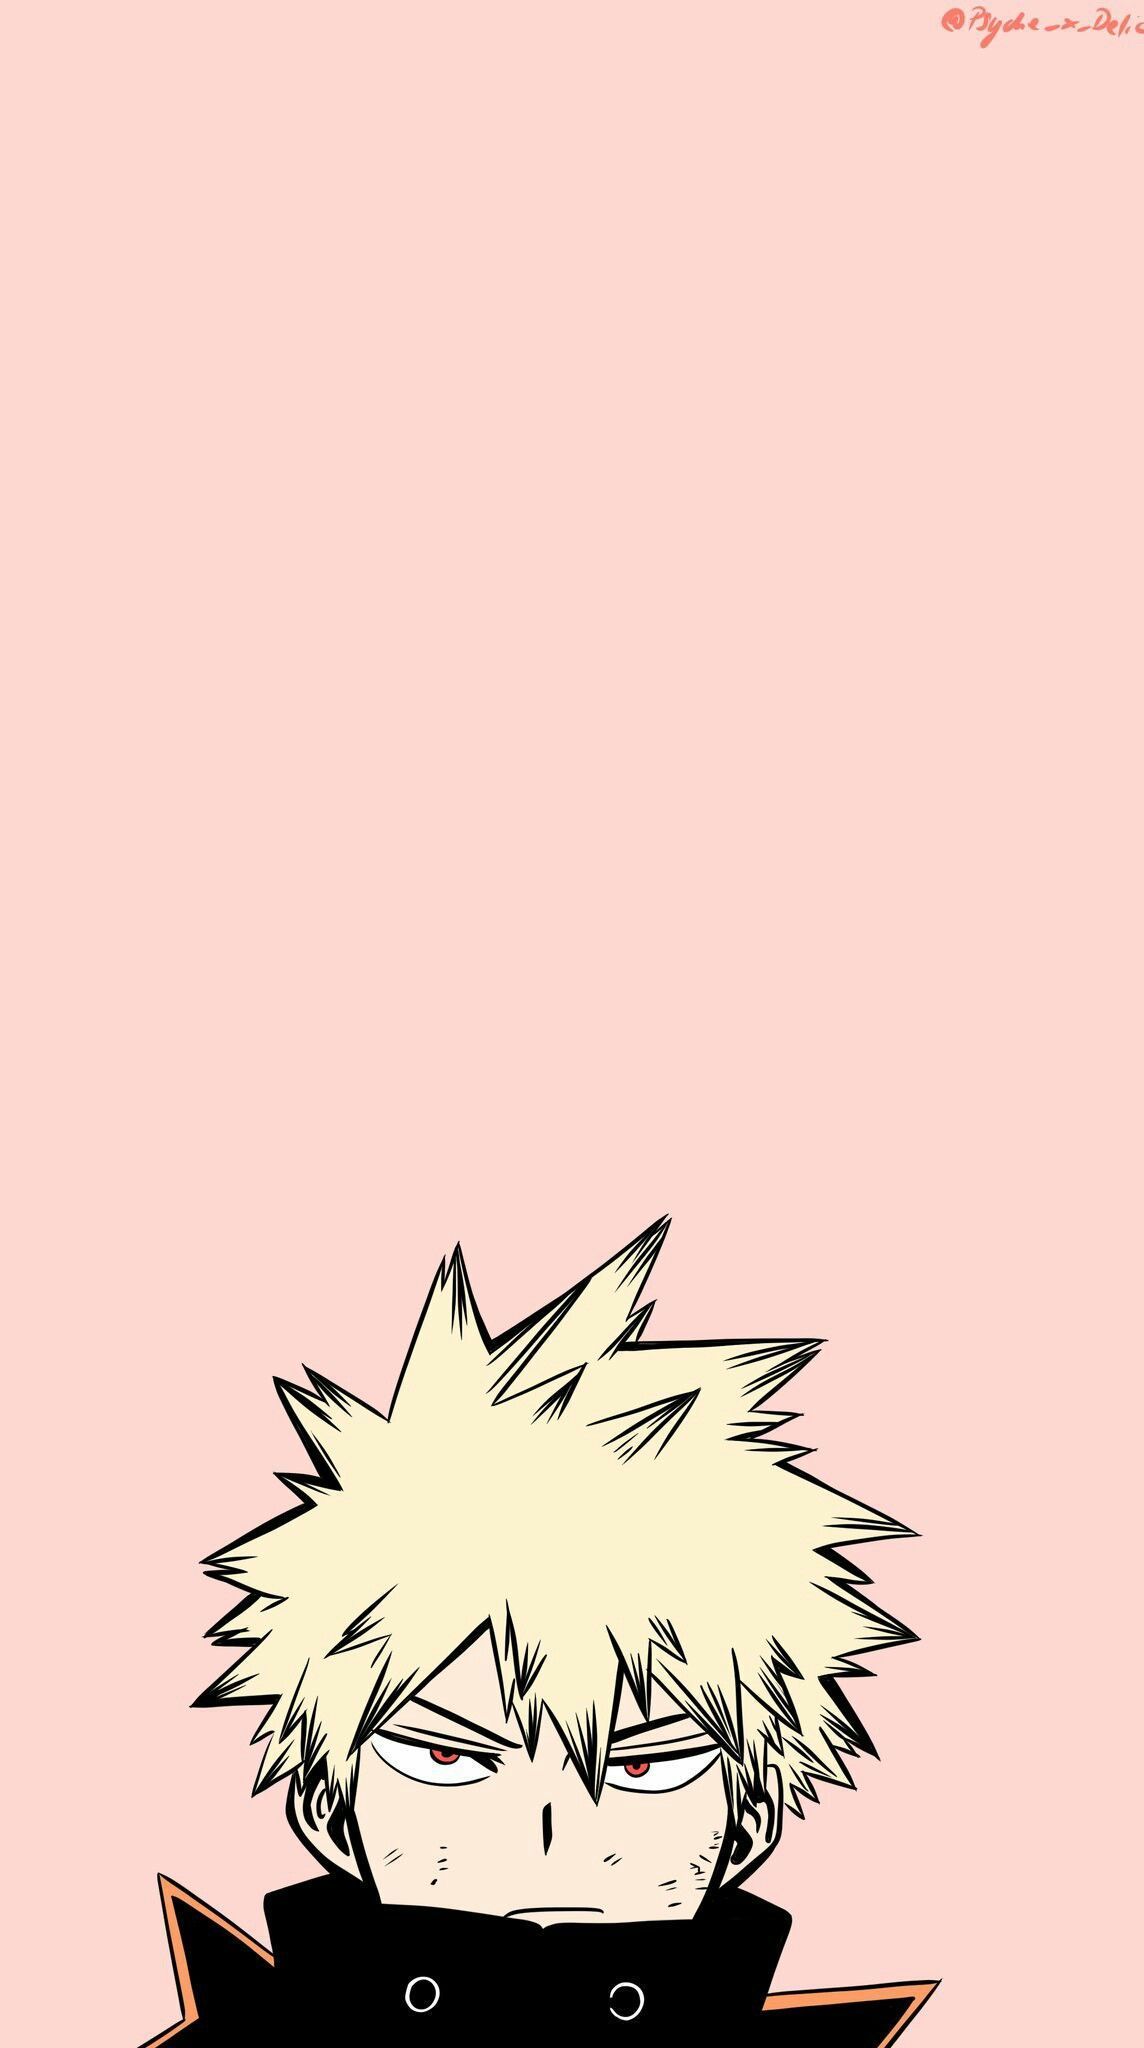 Bakugo Pictures Wallpapers